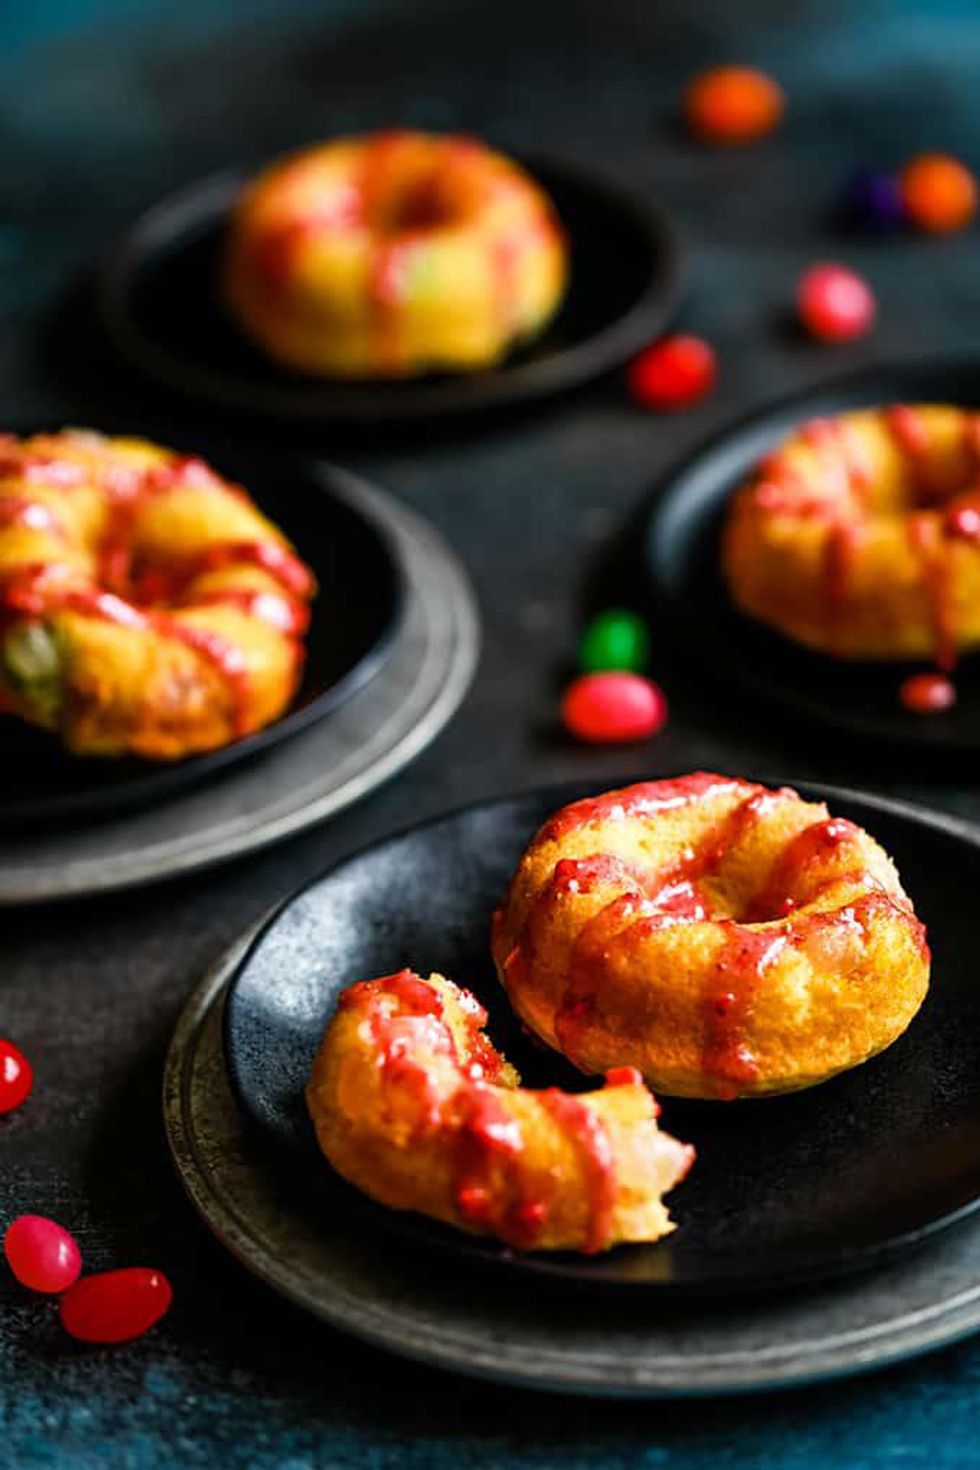 Jelly Bean Donuts